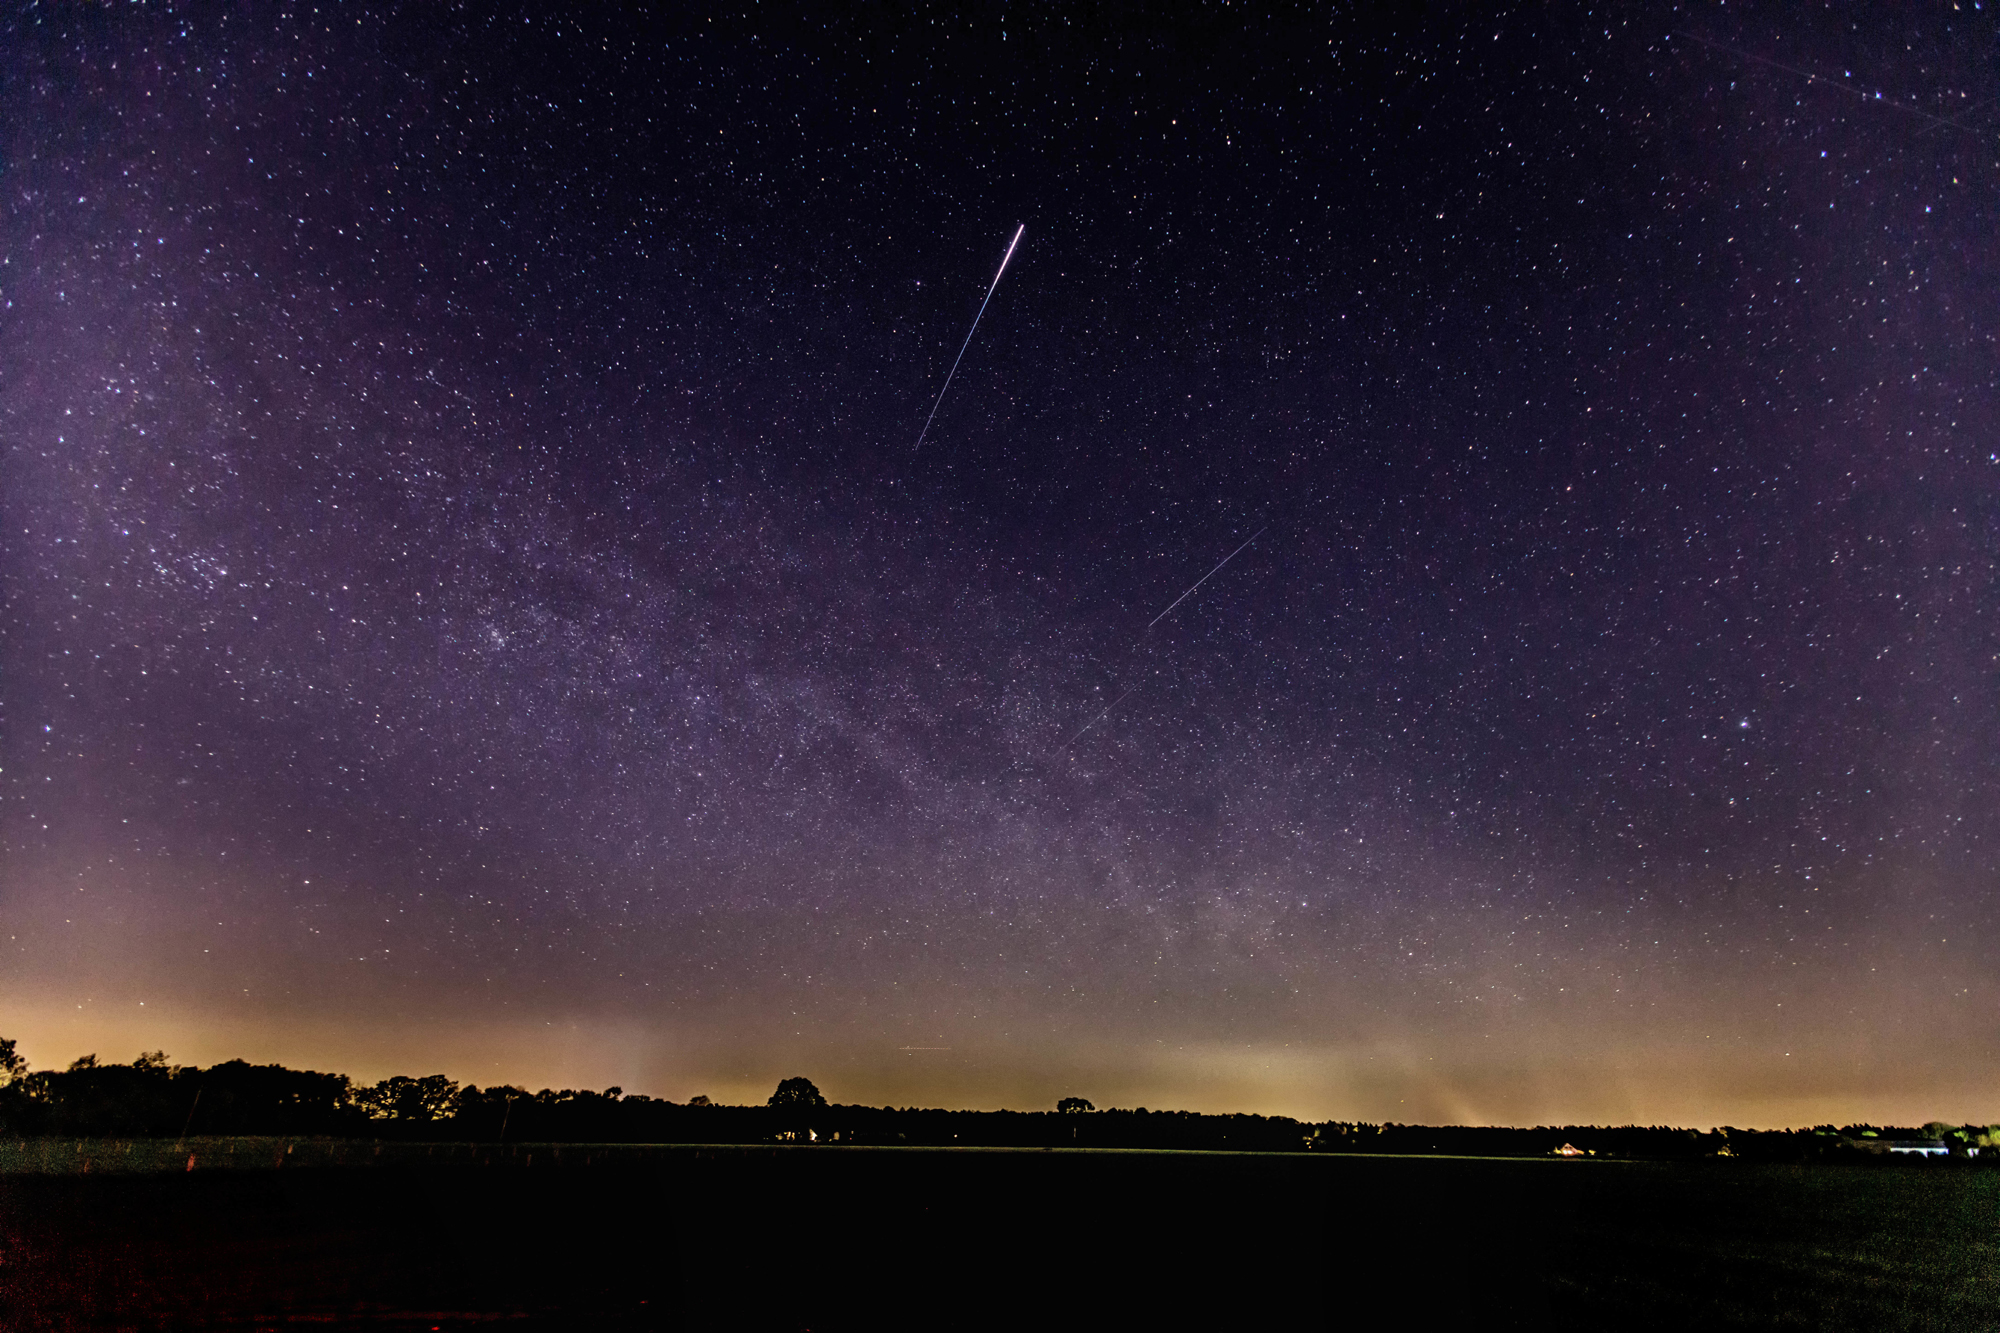 Meteor Shower Schedule 2022 The Lyrid Meteor Shower Of 2021 Peaks Tonight! Here's How To See It. | Space